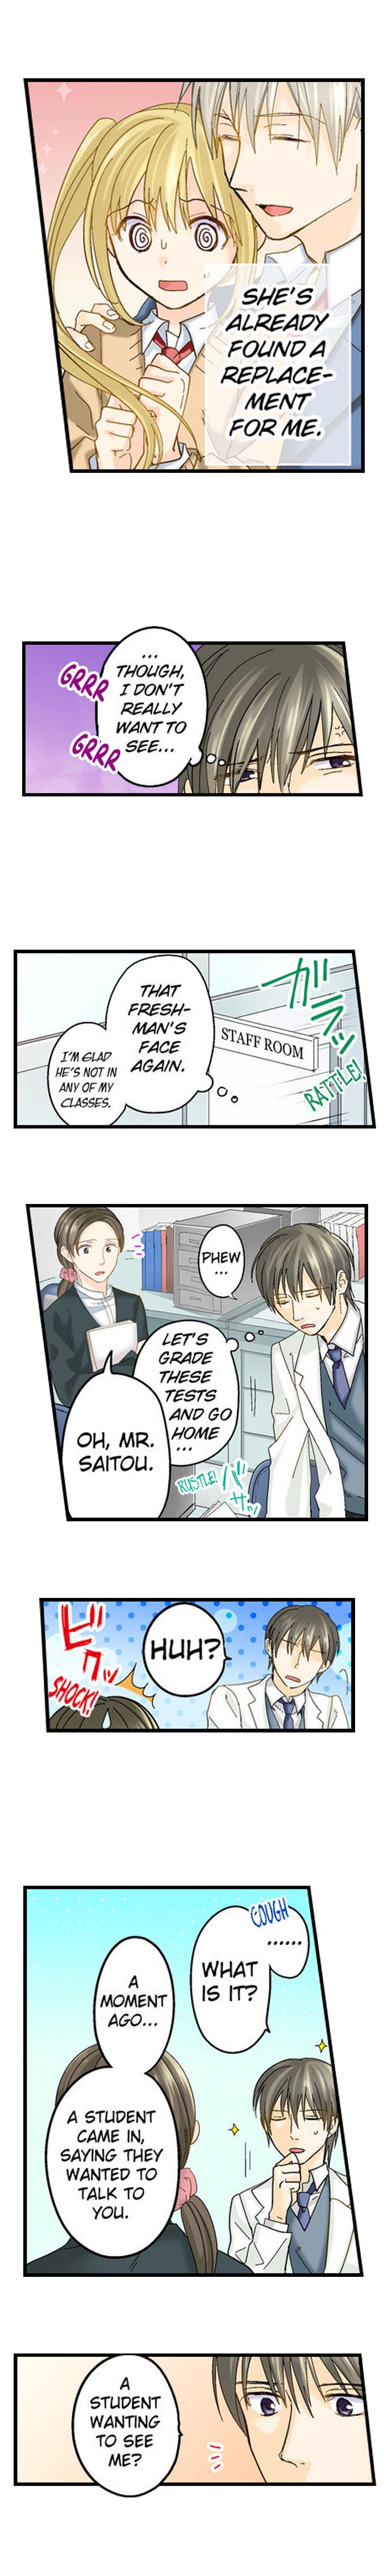 Running a Love Hotel with My Math Teacher - Chapter 30 Page 8